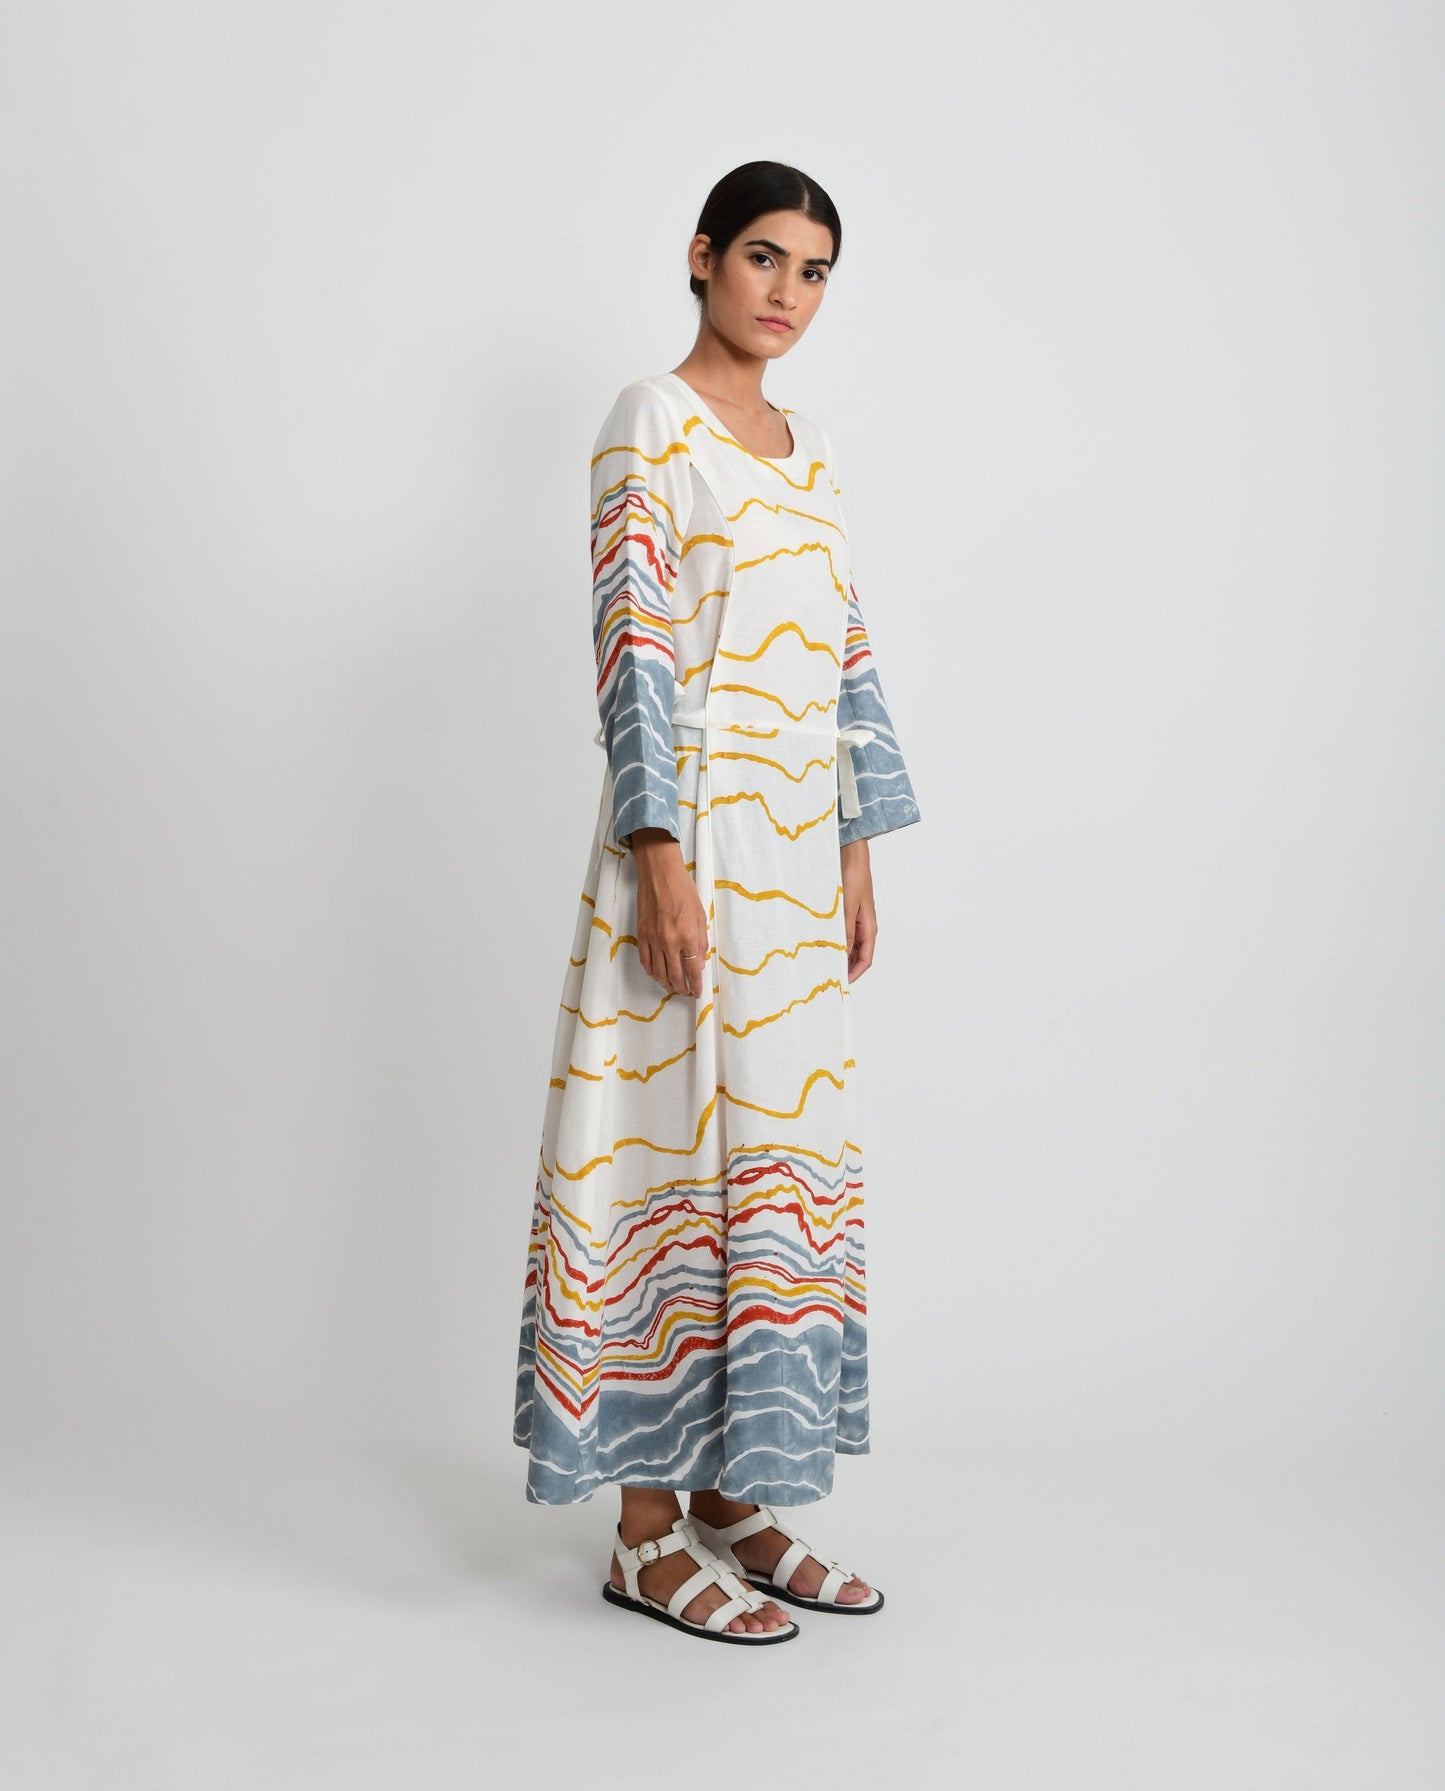 White Tie Up Block Print Dress by Rias Jaipur with Azo Free Dye, Bamboo, Block Prints, Casual Wear, Cotton, Midi Dresses, Parat, Parat by Rias Jaipur, Regular Fit, White, Womenswear at Kamakhyaa for sustainable fashion